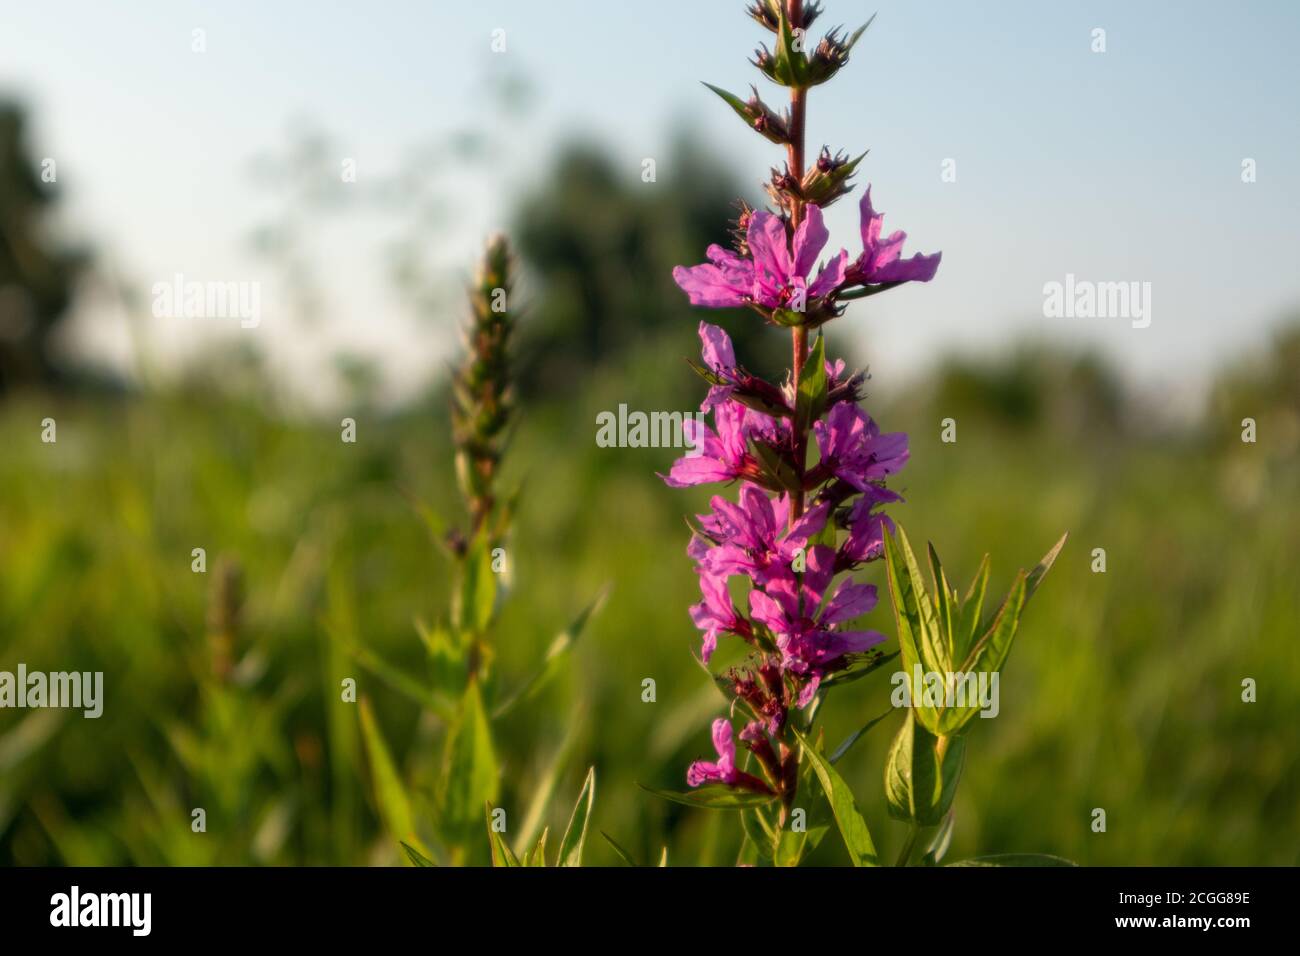 Lythrum salicaria, or purple loosestrife, flowering plant close-up, Lythraceae family. Pink wild flowers in sunset warm light on green summer grass la Stock Photo